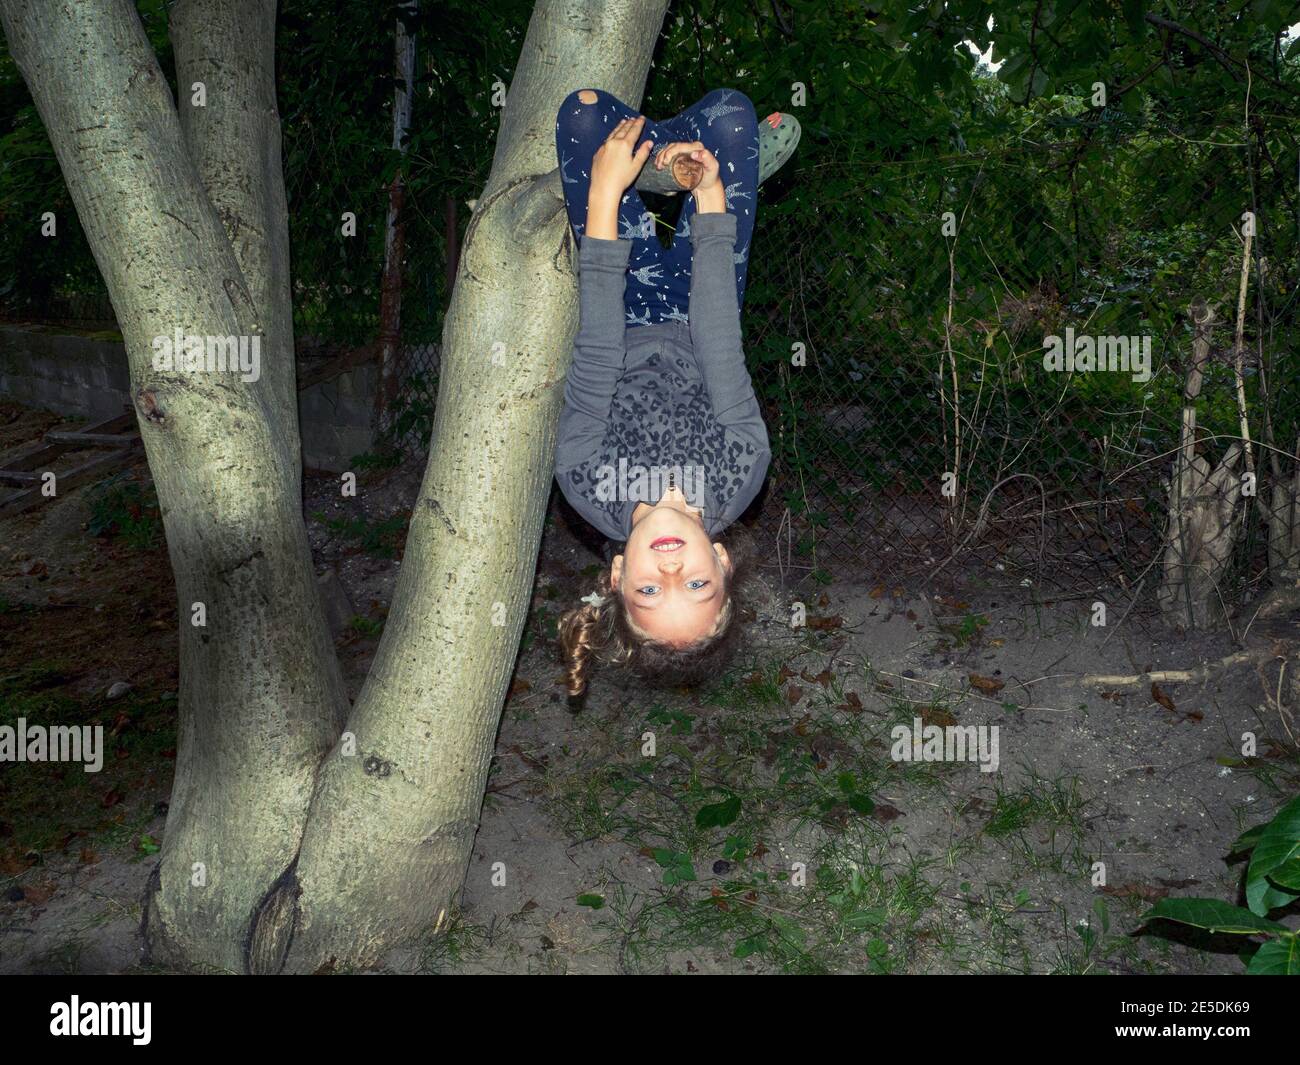 Smiling girl hanging upside down in a tree, Poland Stock Photo